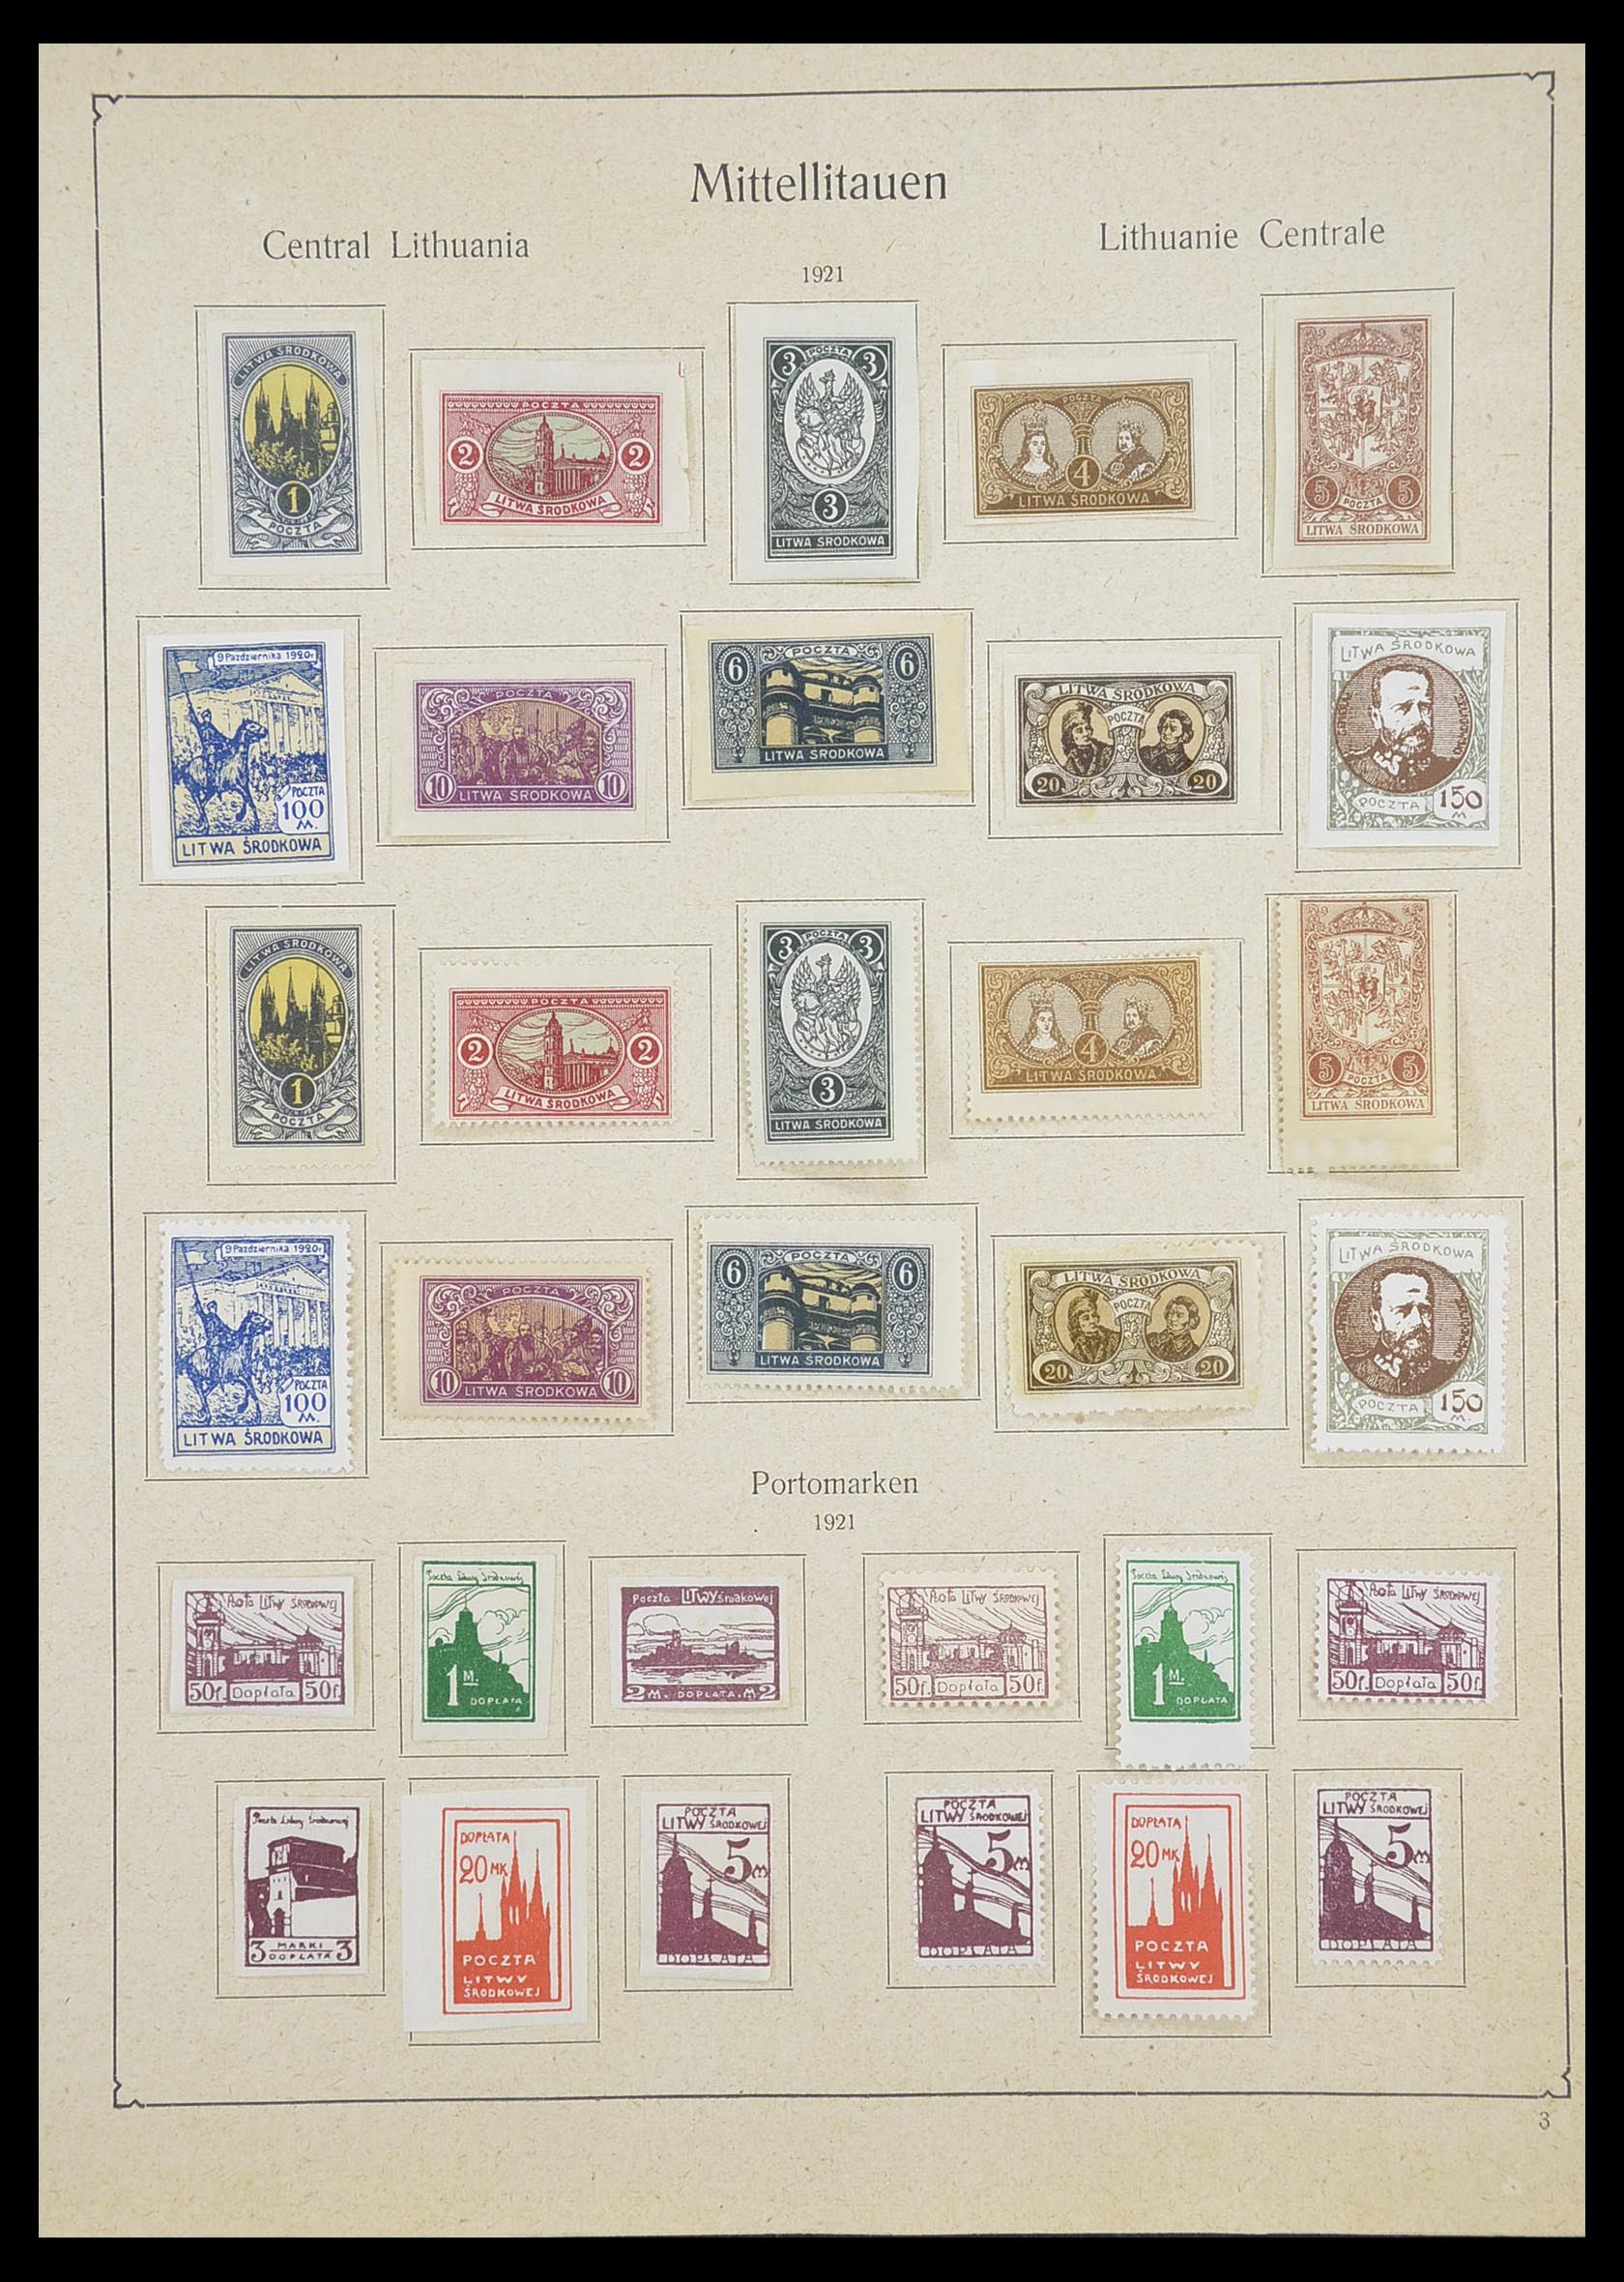 33440 003 - Stamp collection 33440 Central Lithuania 1920-1921.